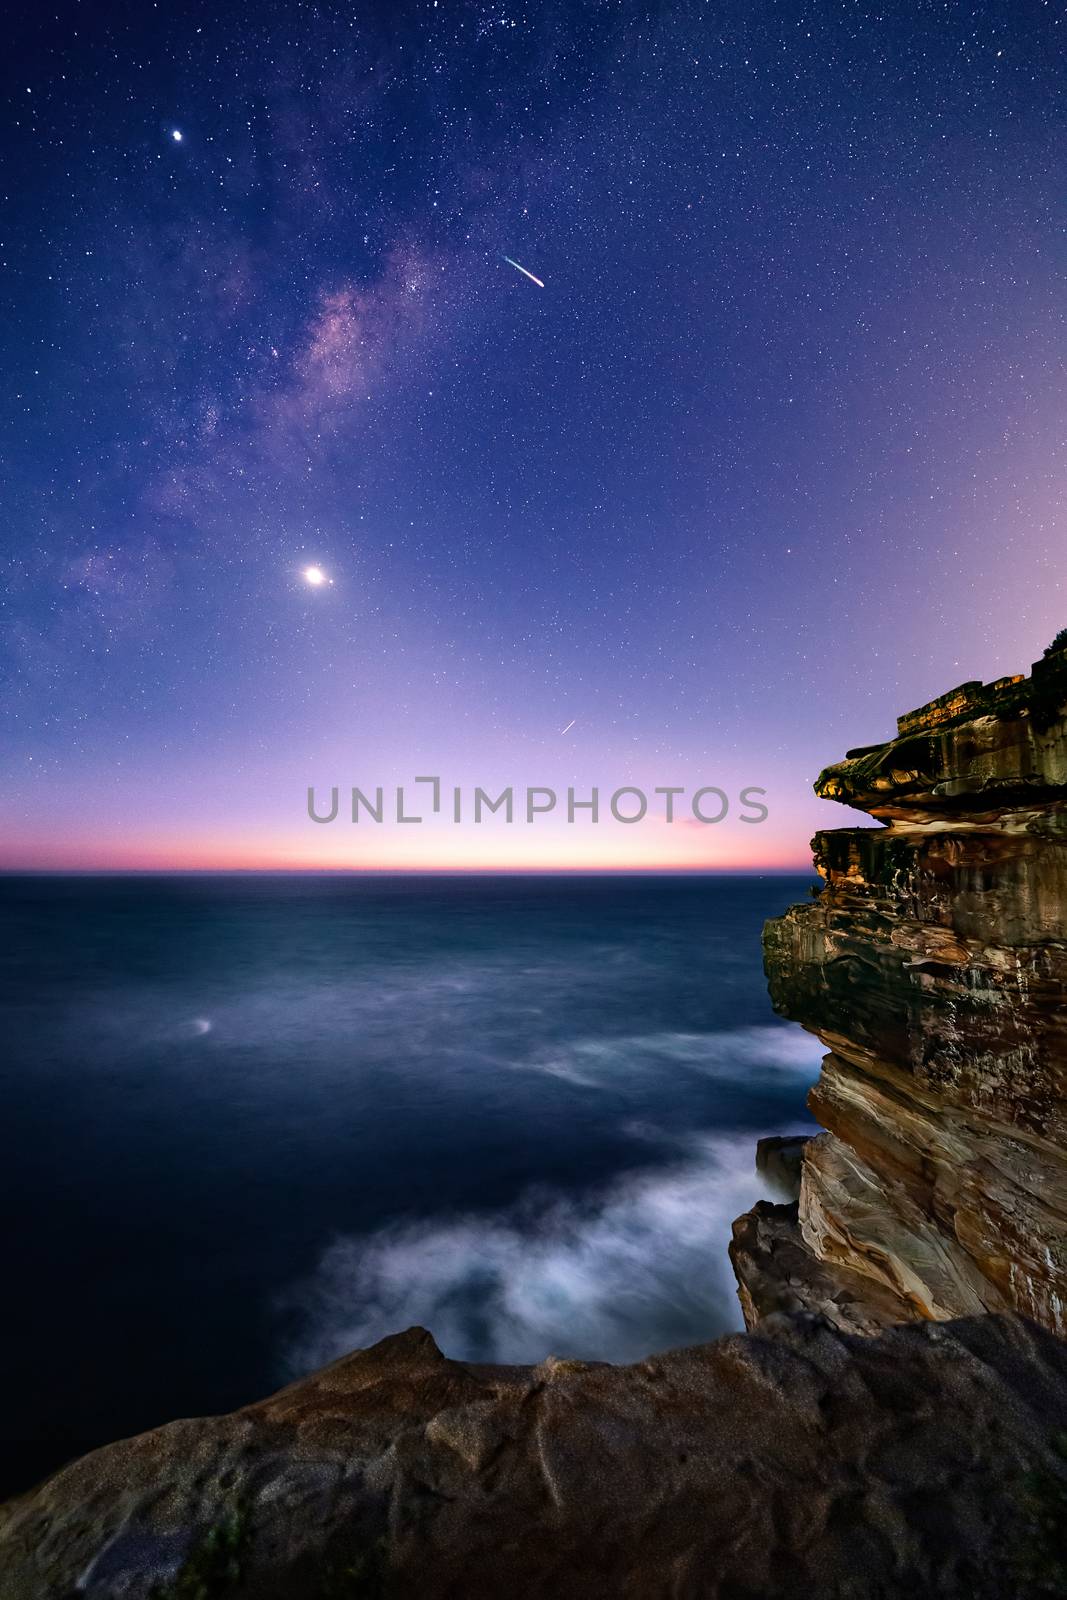 Sydney coast by night with starry universe and milky way overhead and a deep blue ocean p9unding the sandstone cliffs of Sydney East Coast of Australia